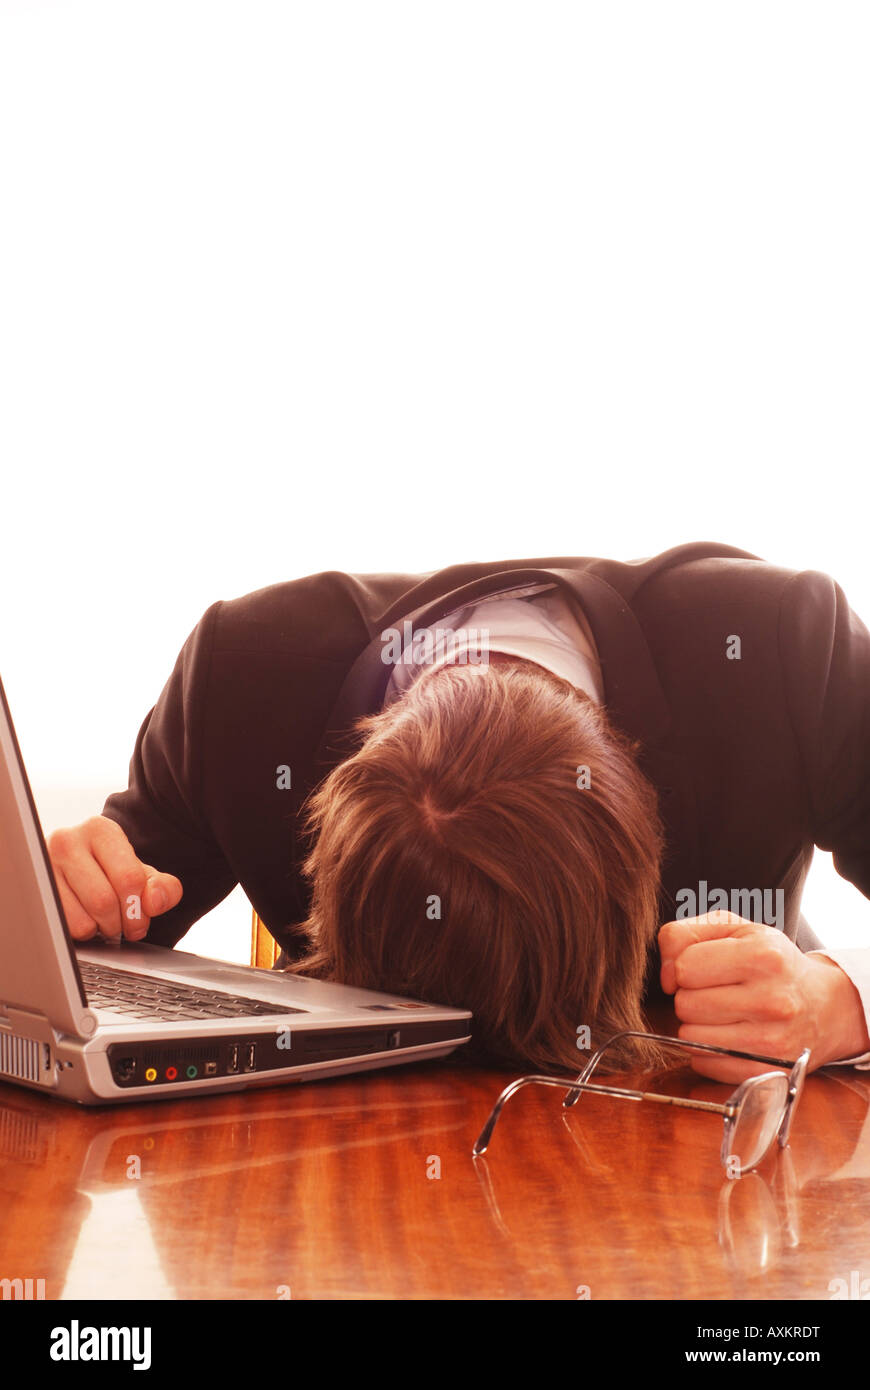 Man sleeping at work on the computer Stock Photo